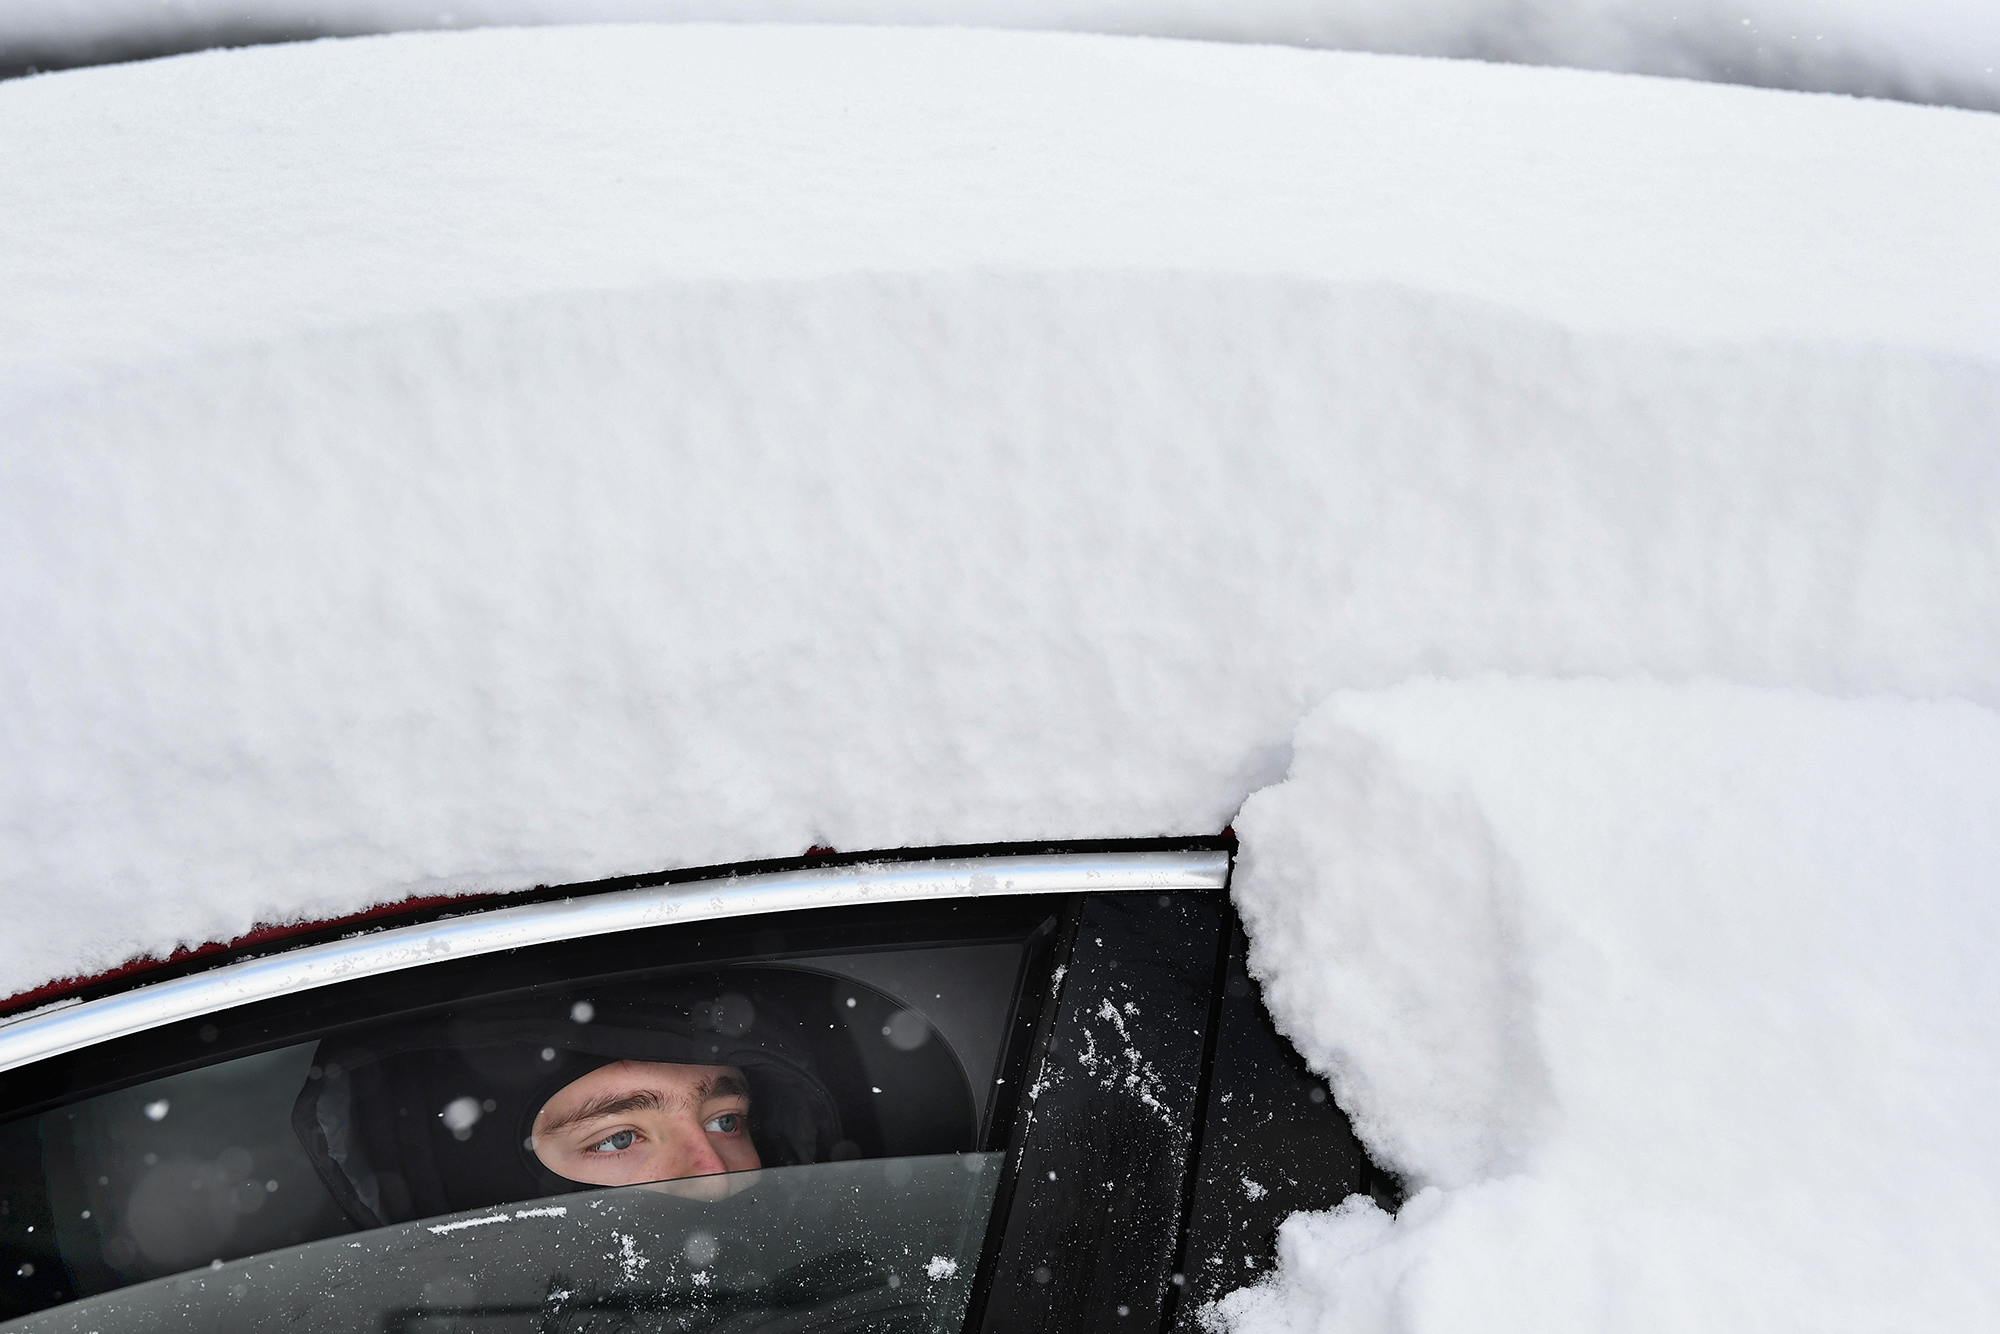 ALEXANDRIA, UNITED KINGDOM - MARCH 01: A boy looks out from snow covered car on March 1, 2018 in Alexandria, Scotland. People have been warned to not to make unnecessary journeys as the Met office issues a red weather be aware warning for parts of Wales and South West England following the one currently in place in Scotland. (Photo by Jeff J Mitchell/Getty Images)